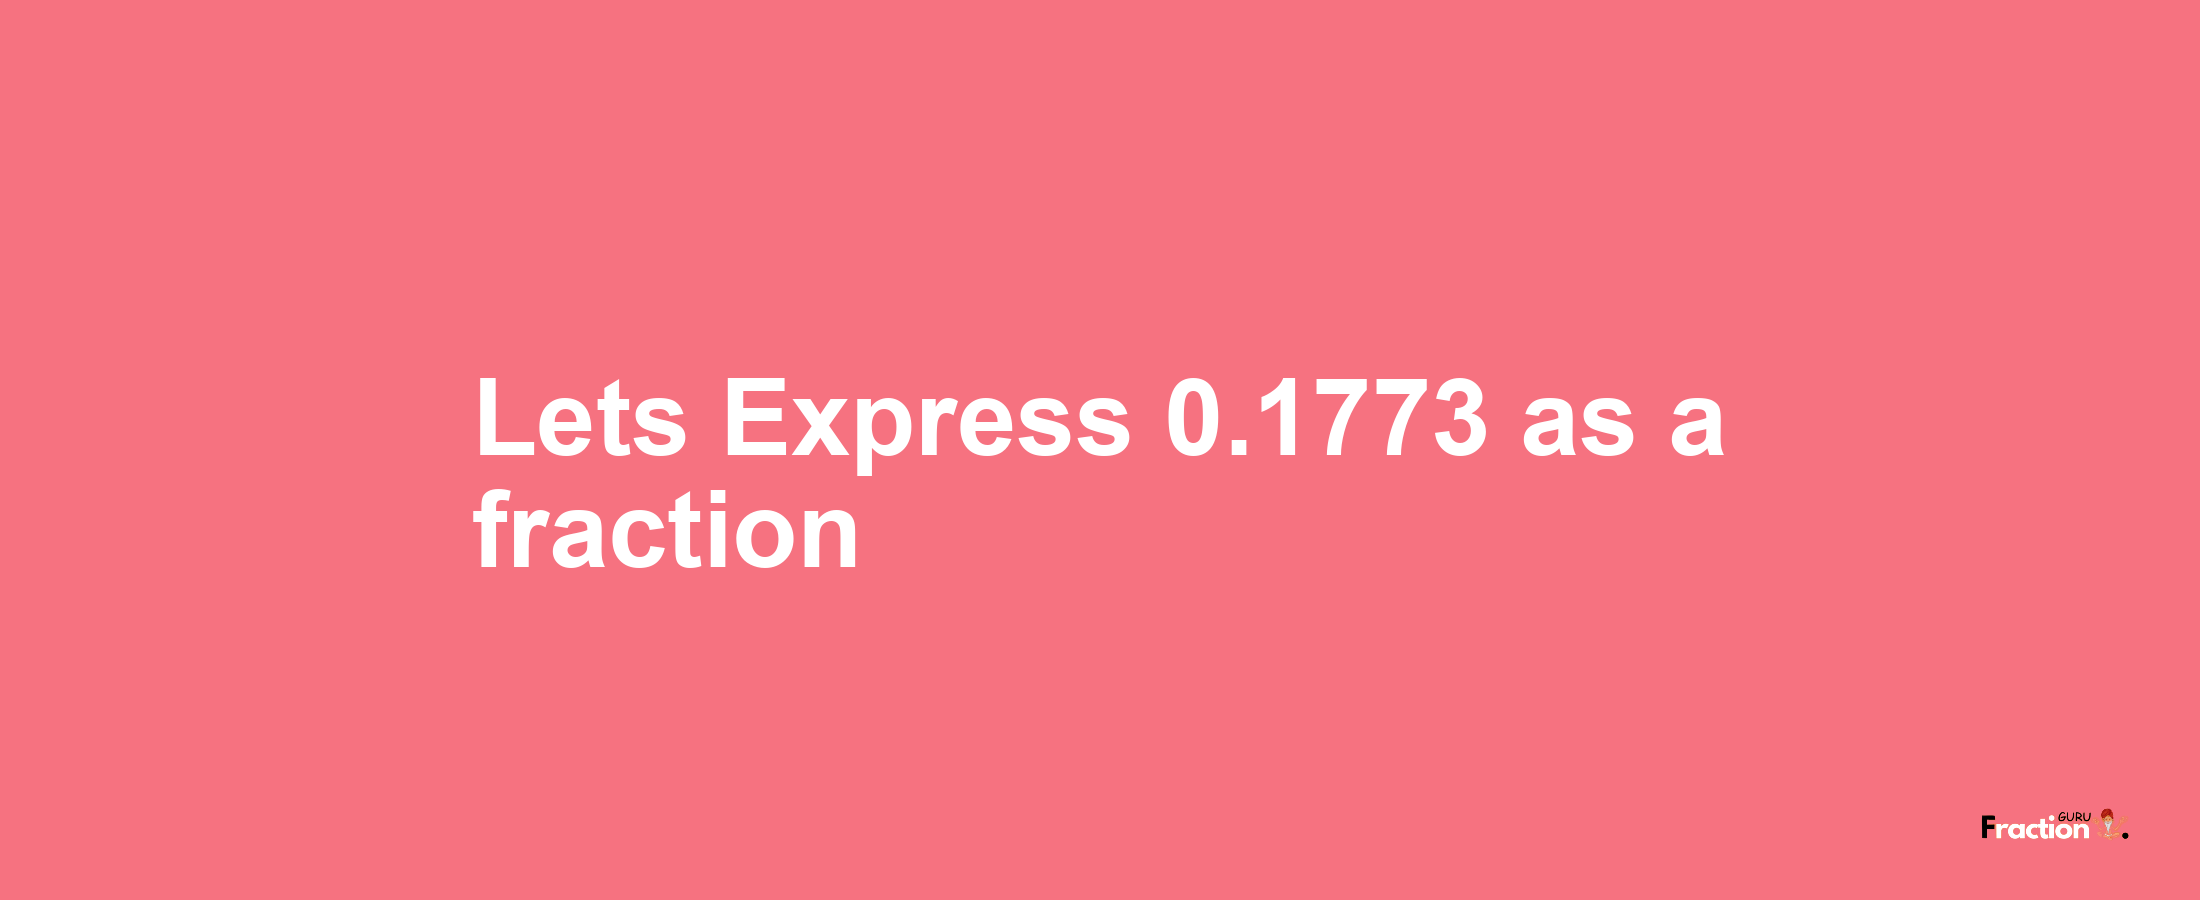 Lets Express 0.1773 as afraction